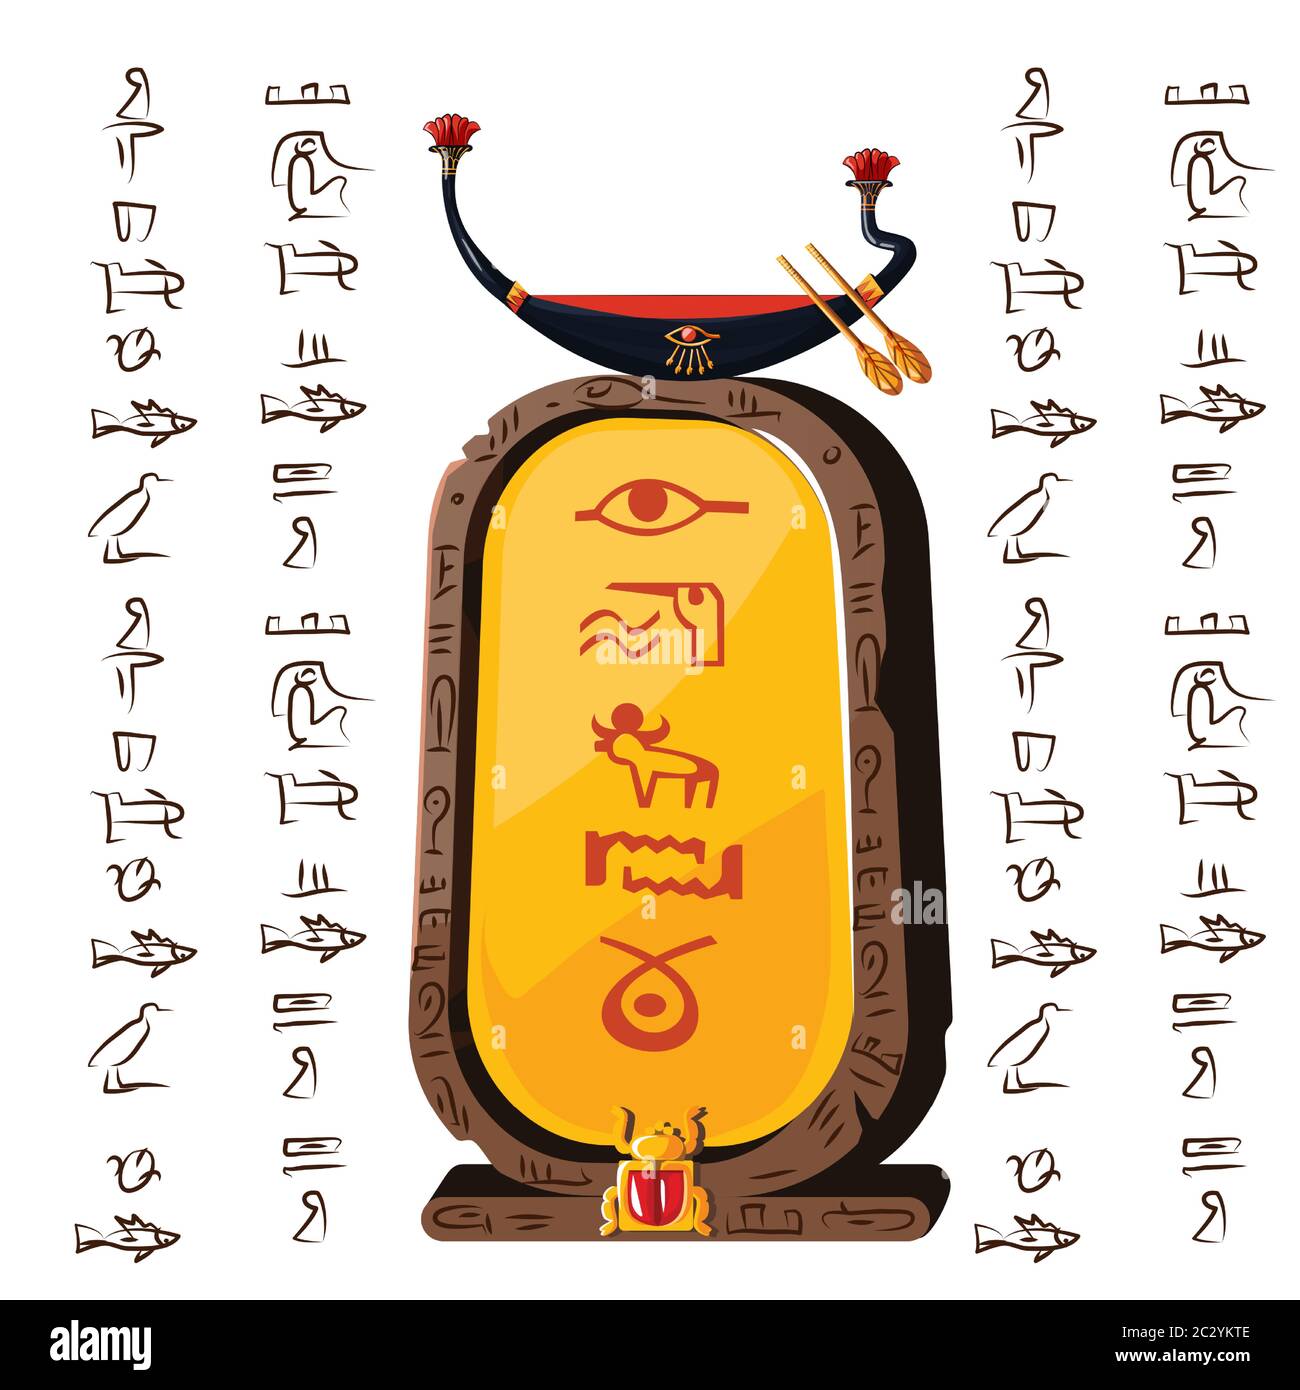 Stone board or clay plate with boat Ra and Egyptian hieroglyphs cartoon vector illustration. Ancient object for recording storing information, graphic Stock Vector